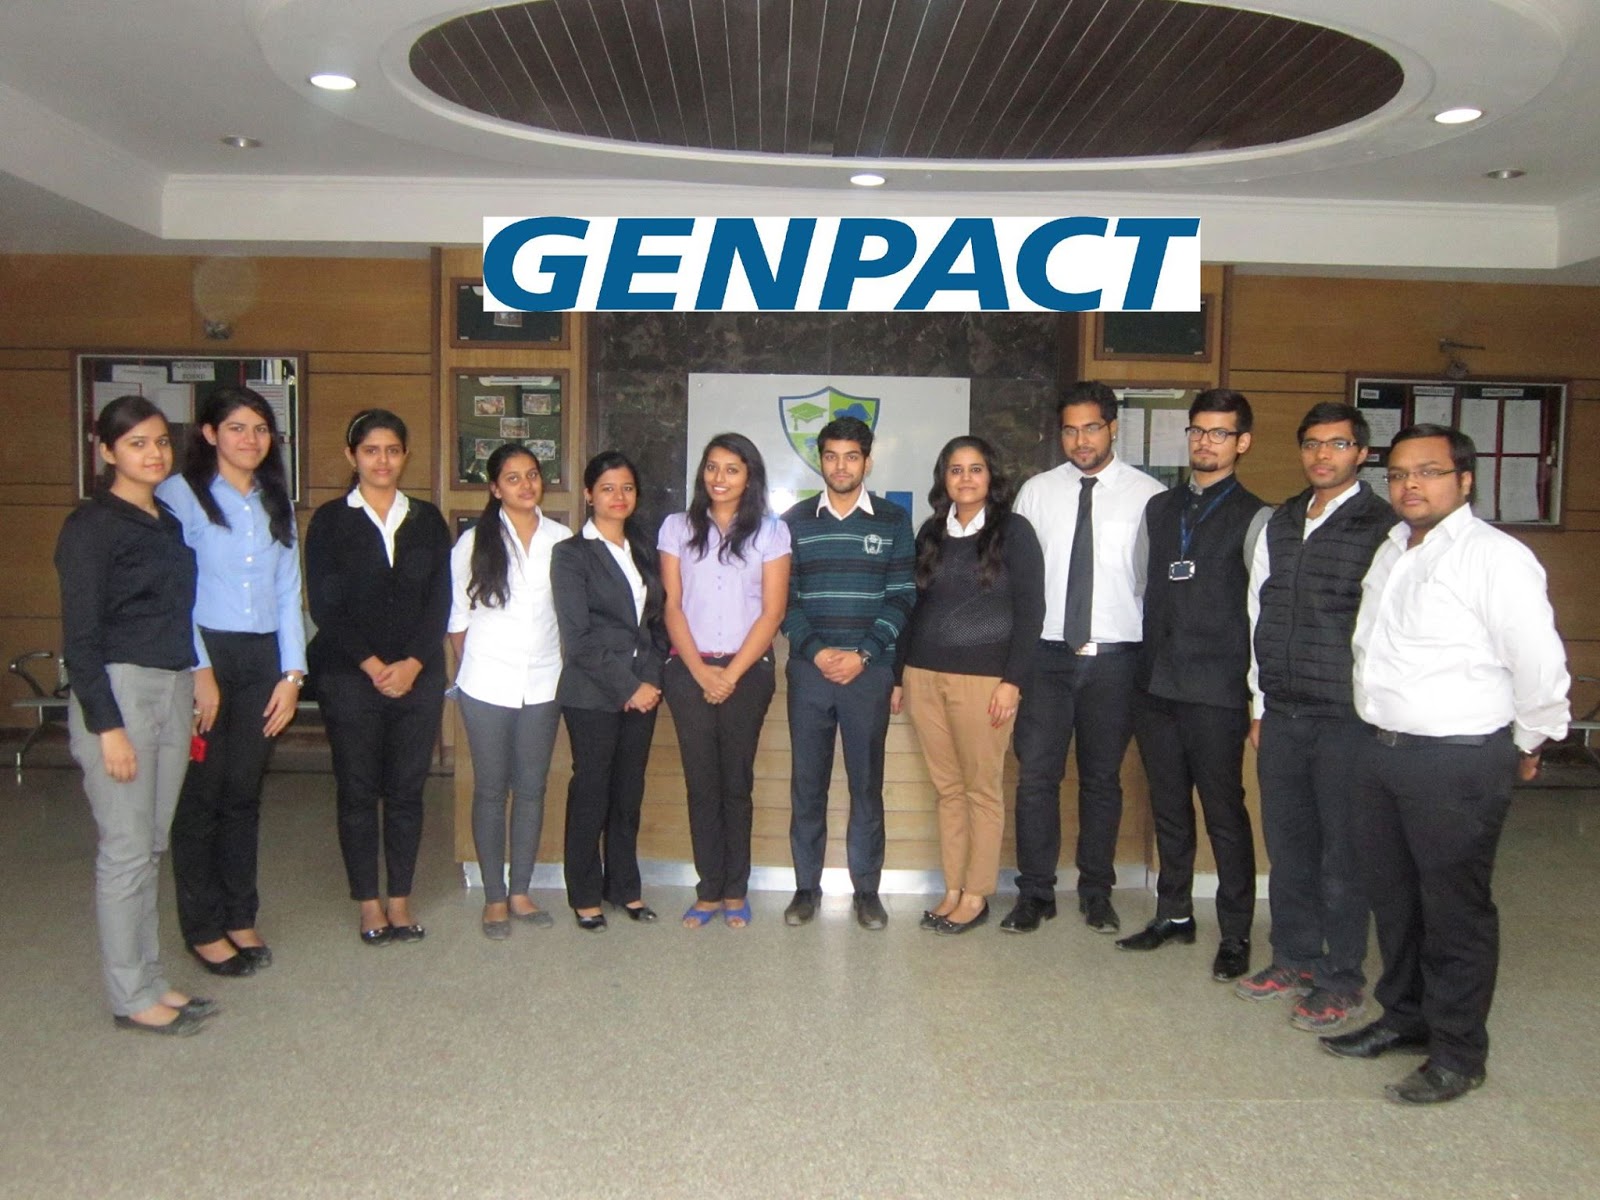 genpact-urgent-job-opening-for-fresher-experience-2013-2014-2015-2016-2017-passout-apply